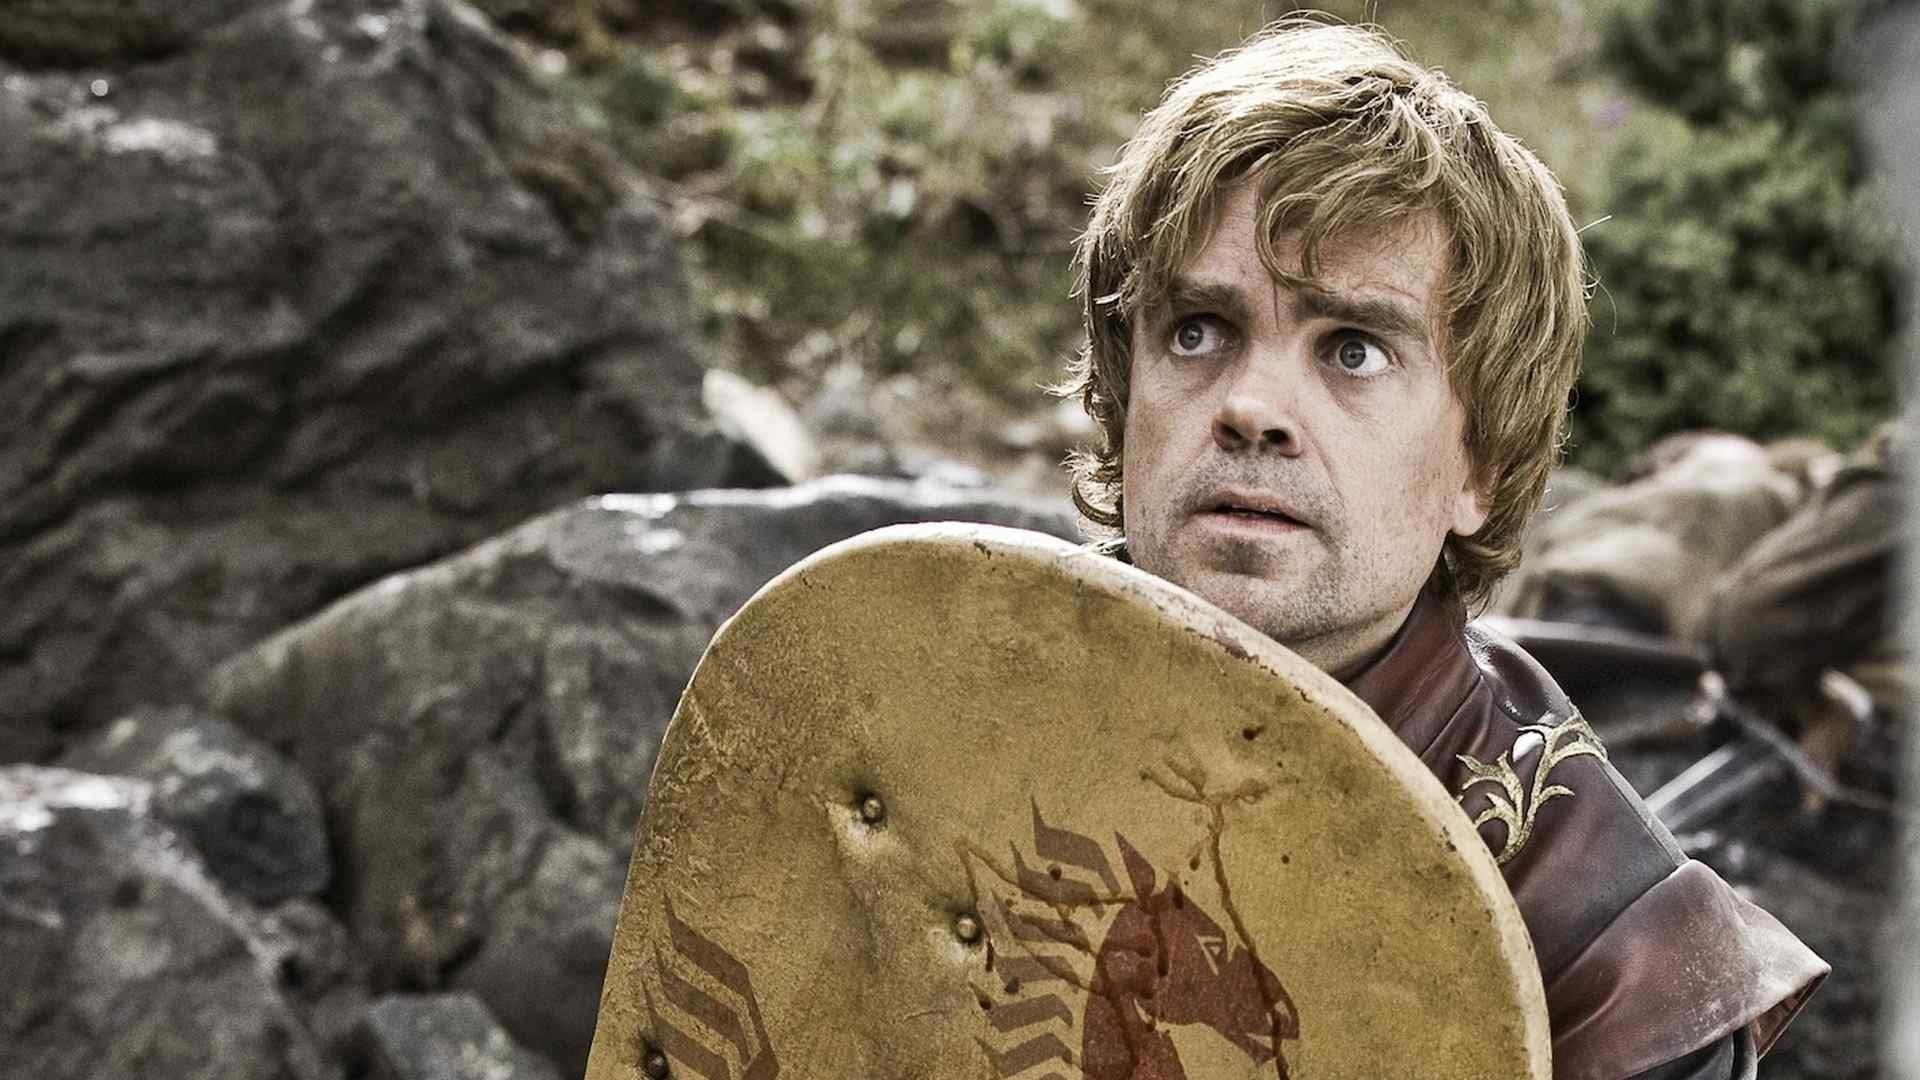 High Resolution Tyrion Lannister Hd 1080p Wallpaper - Lord Tyrion Season 1 - HD Wallpaper 